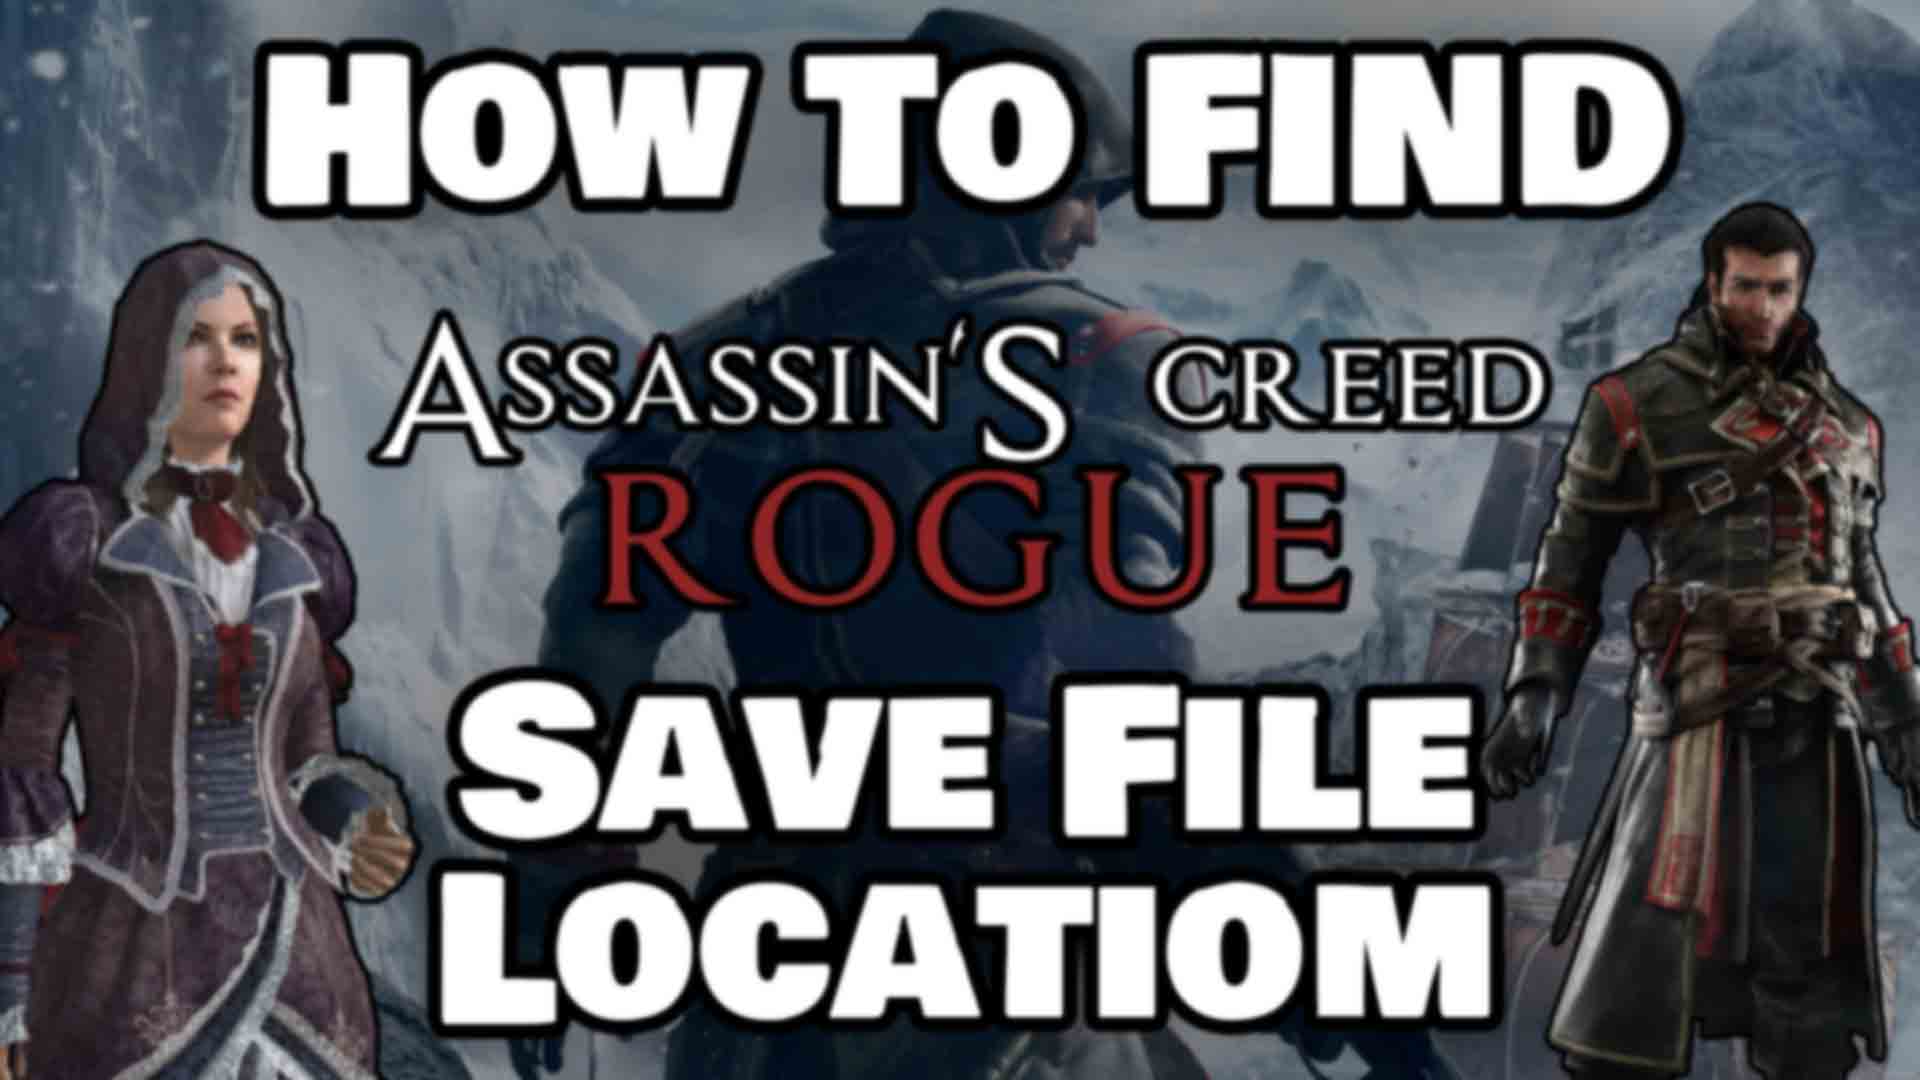 gamehall-org-how-to-assassins-creed-rogue-save-file-location-featured-image-7778077